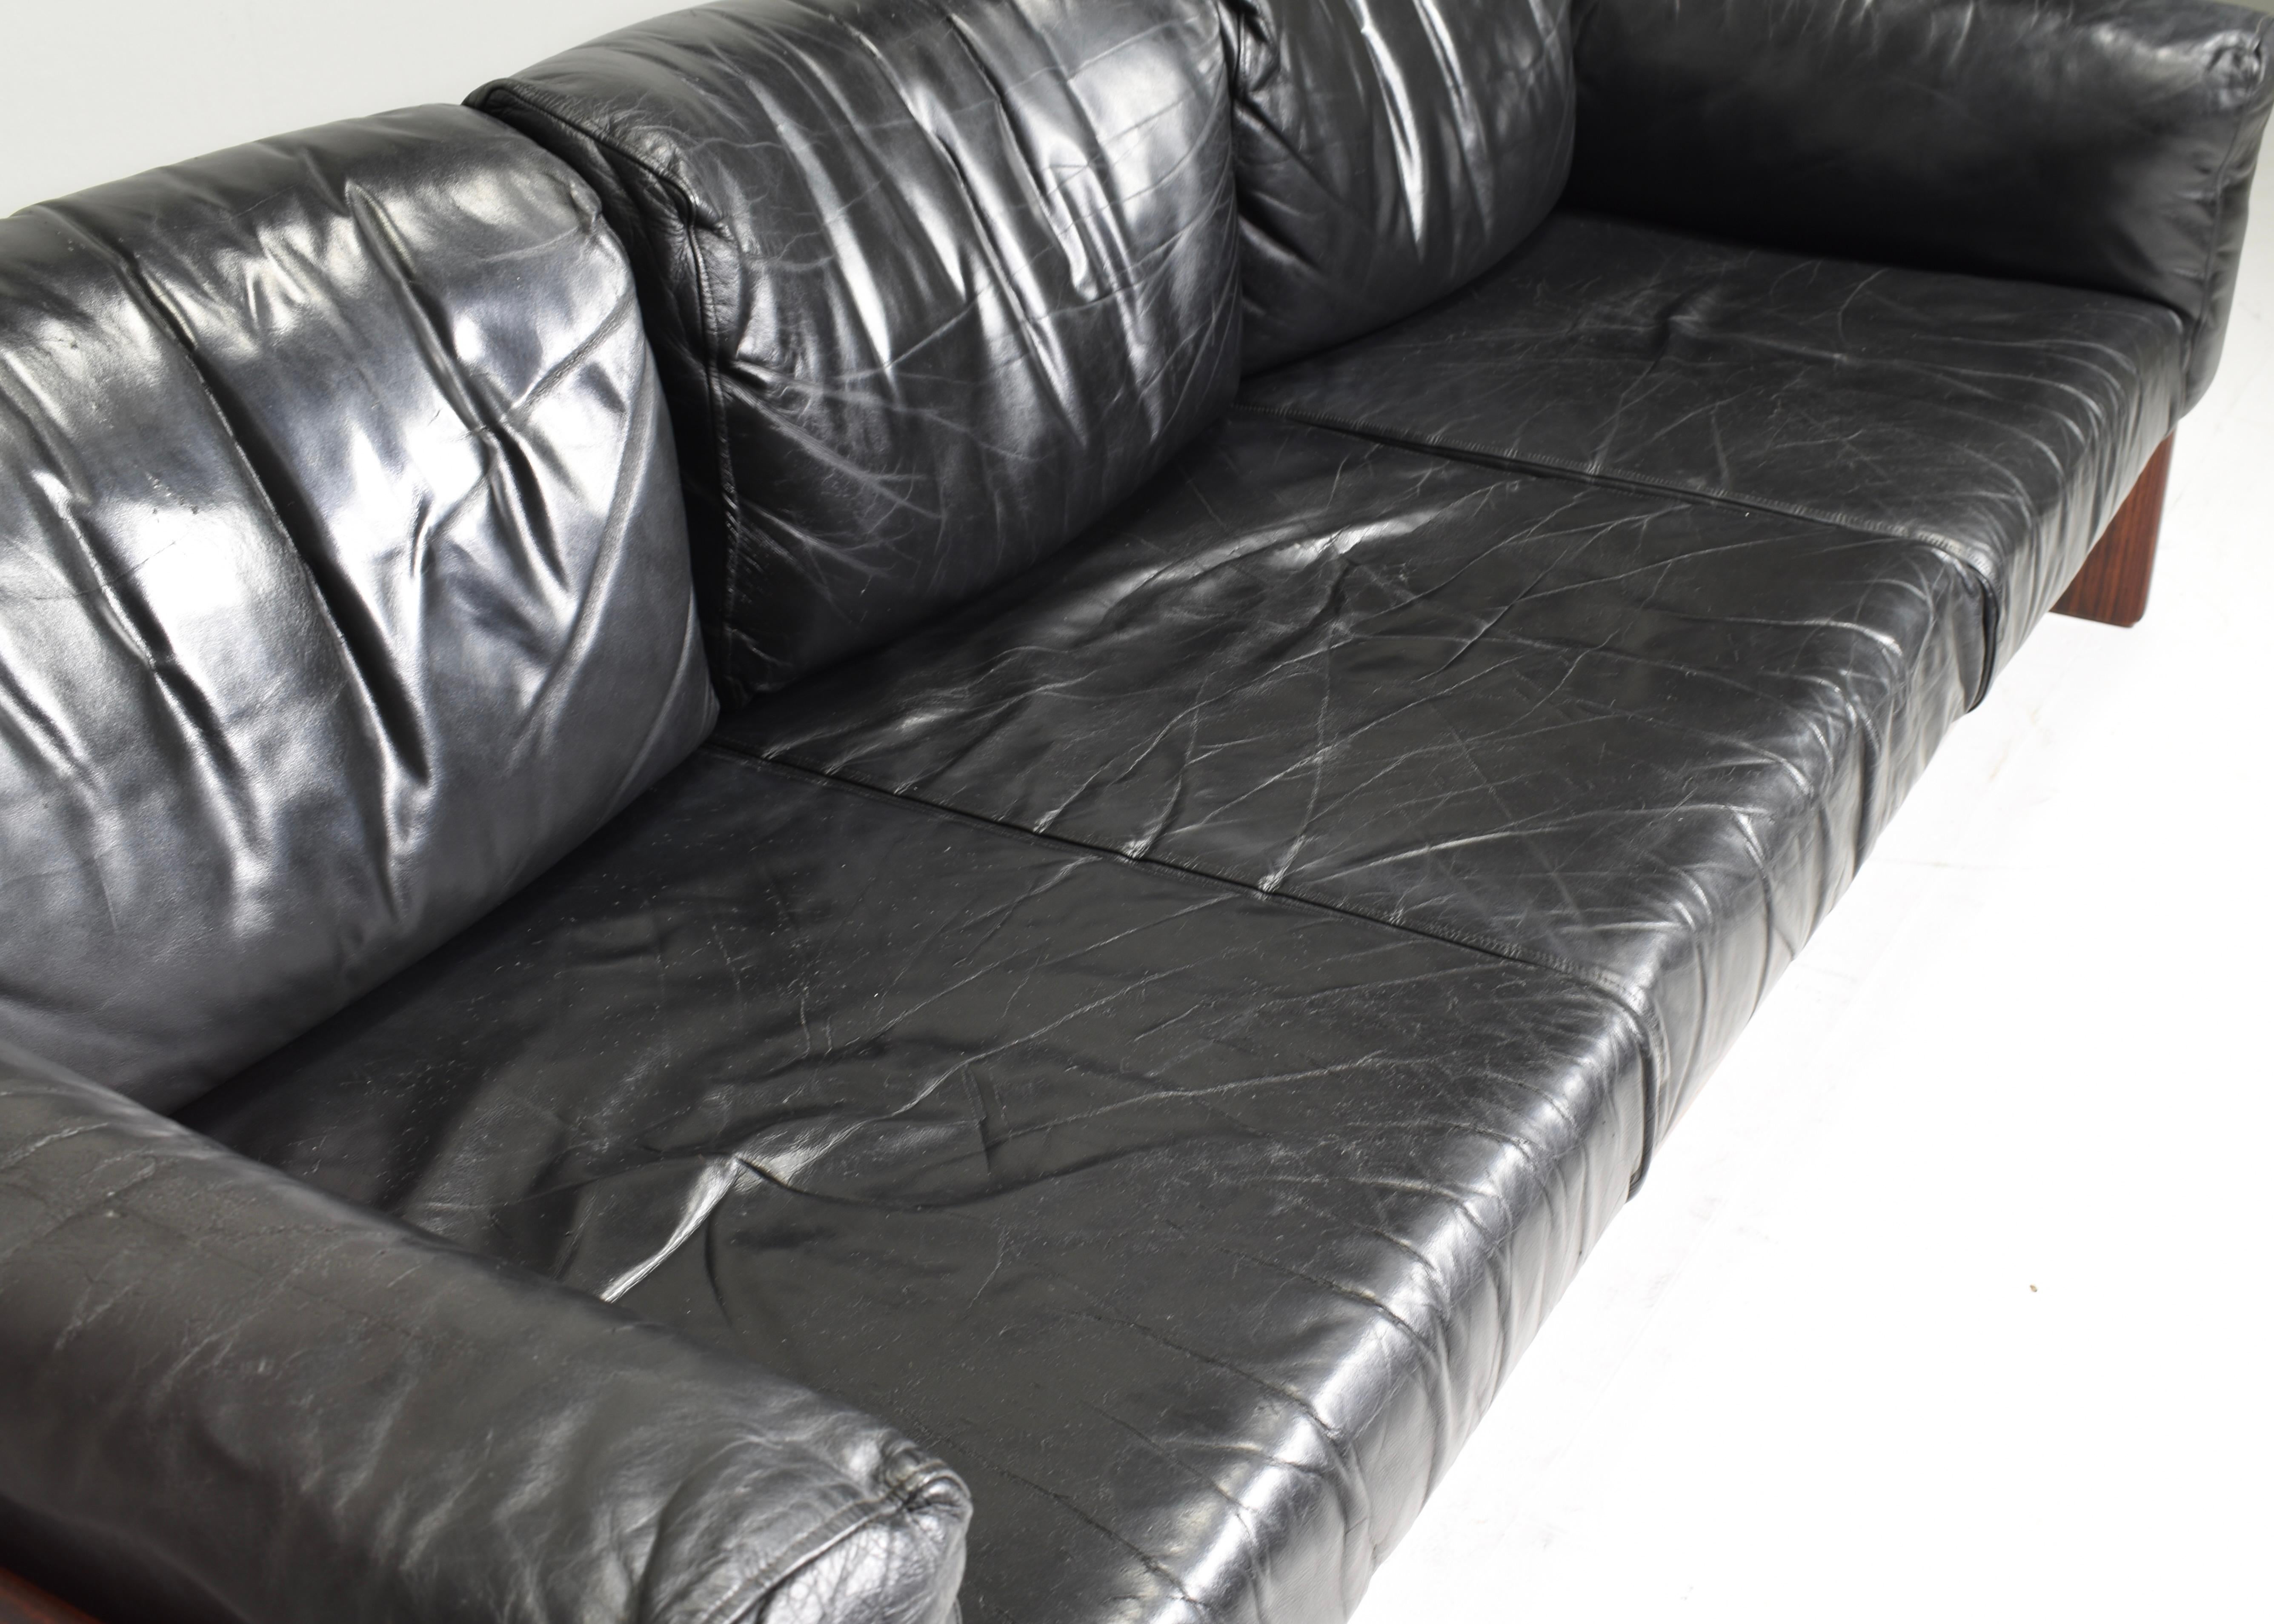 BASTIANO Sofa in black leather by Afra and Tobia Scarpa for KNOLL – Italy, 1962 For Sale 5